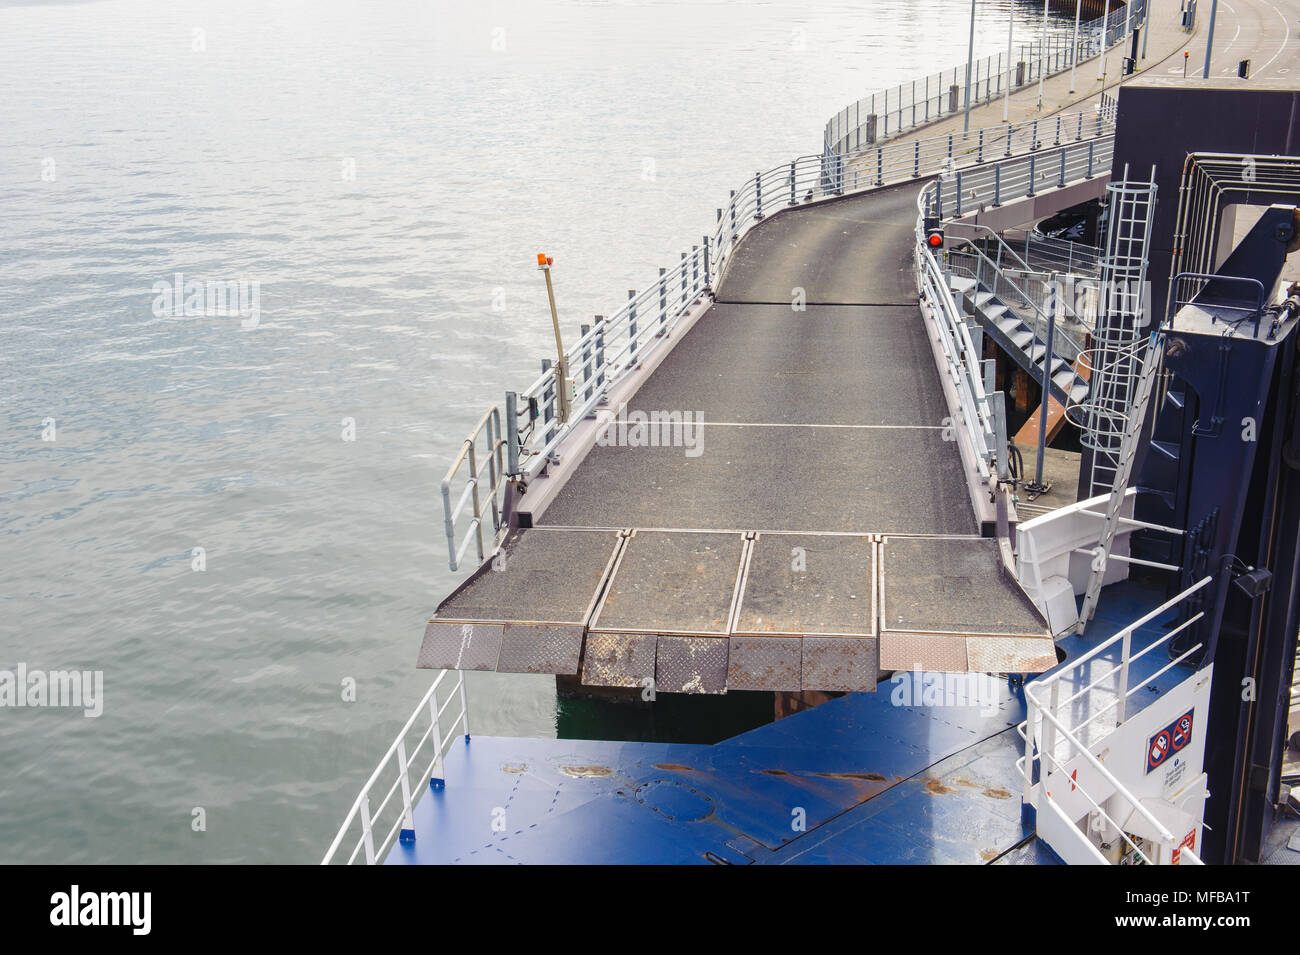 Road for transport of vehicles over the ship to cross the strait Stock Photo